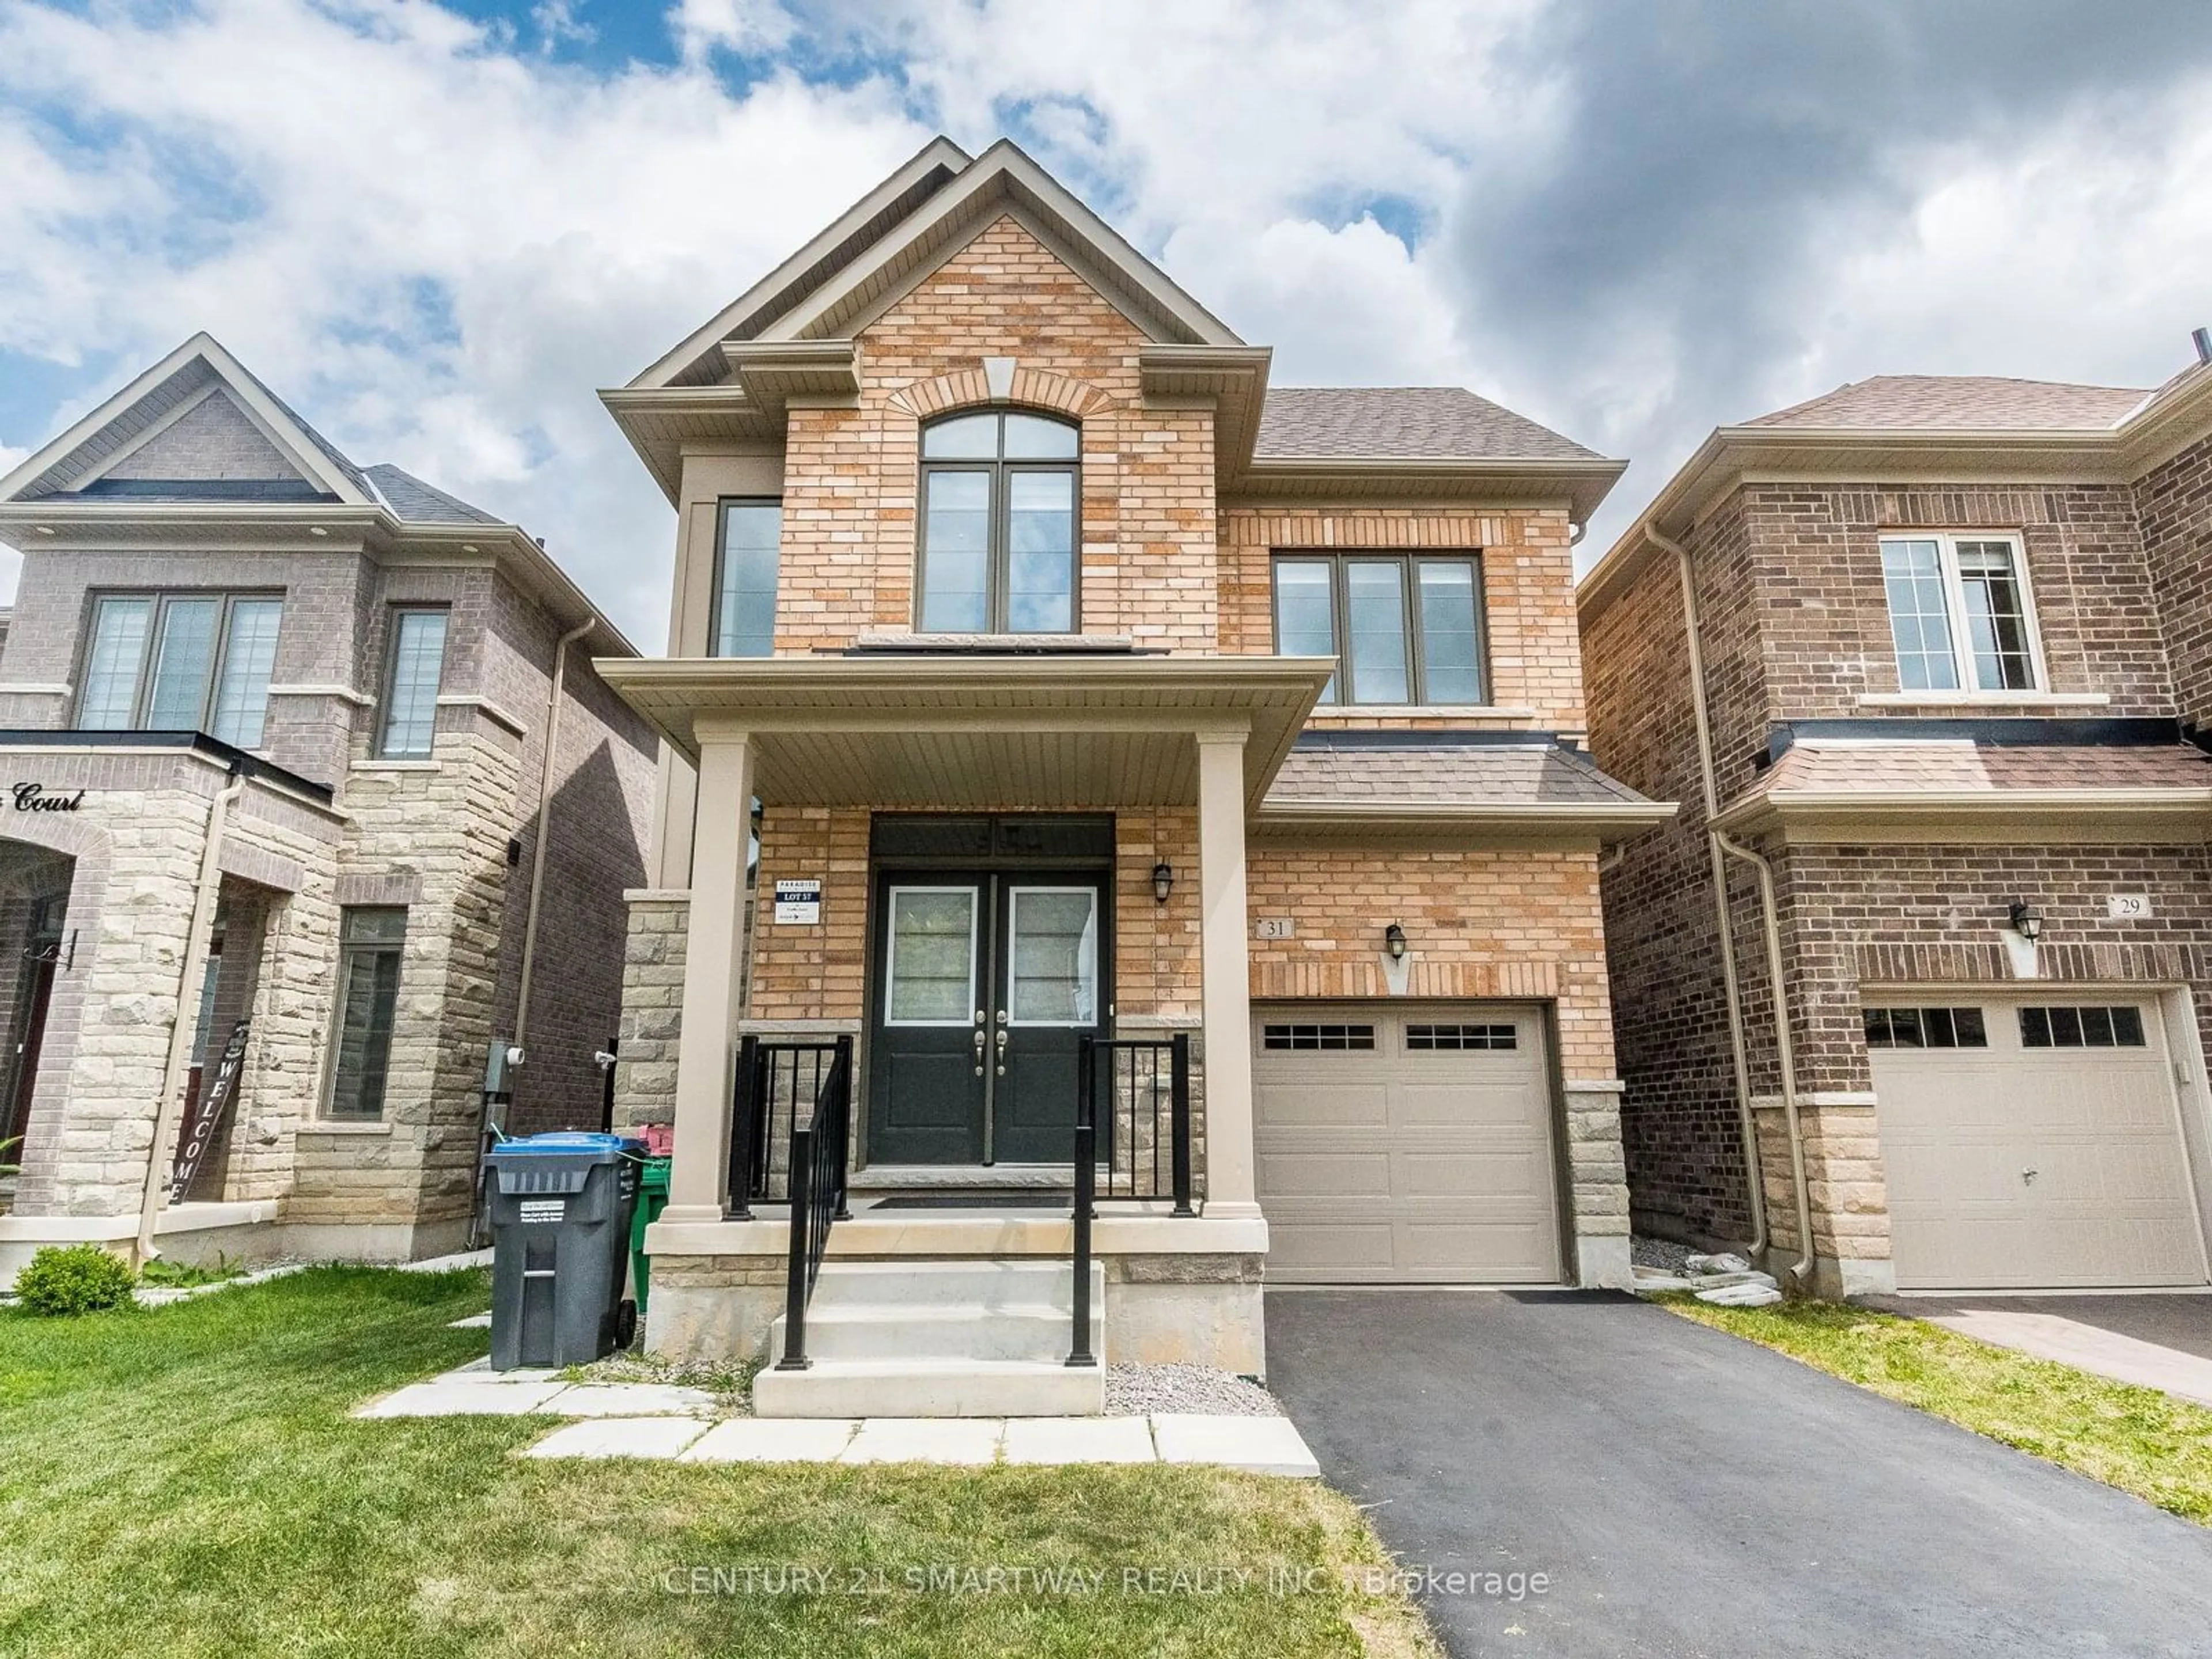 Home with brick exterior material for 31 Truffle Crt, Brampton Ontario L7A 0C4